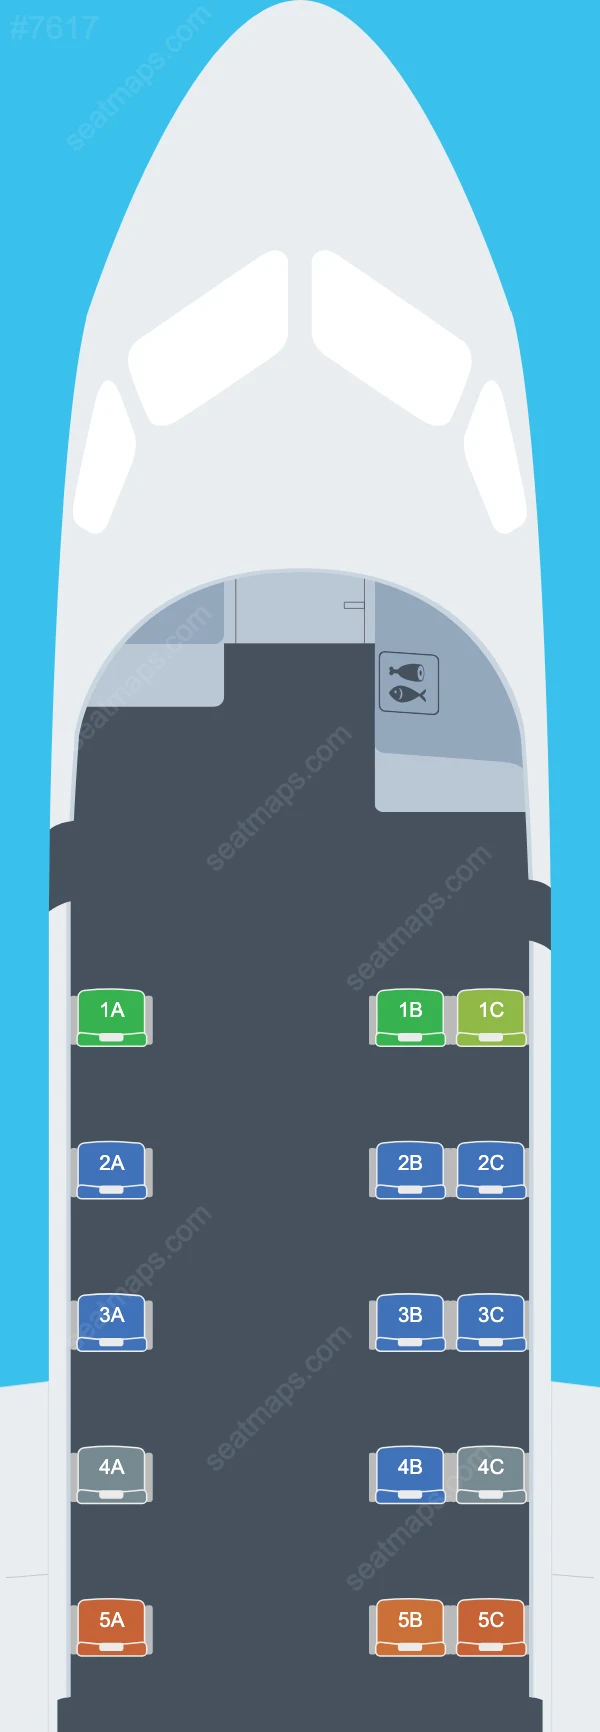 CM Airlines Saab S340 Seat Maps S340